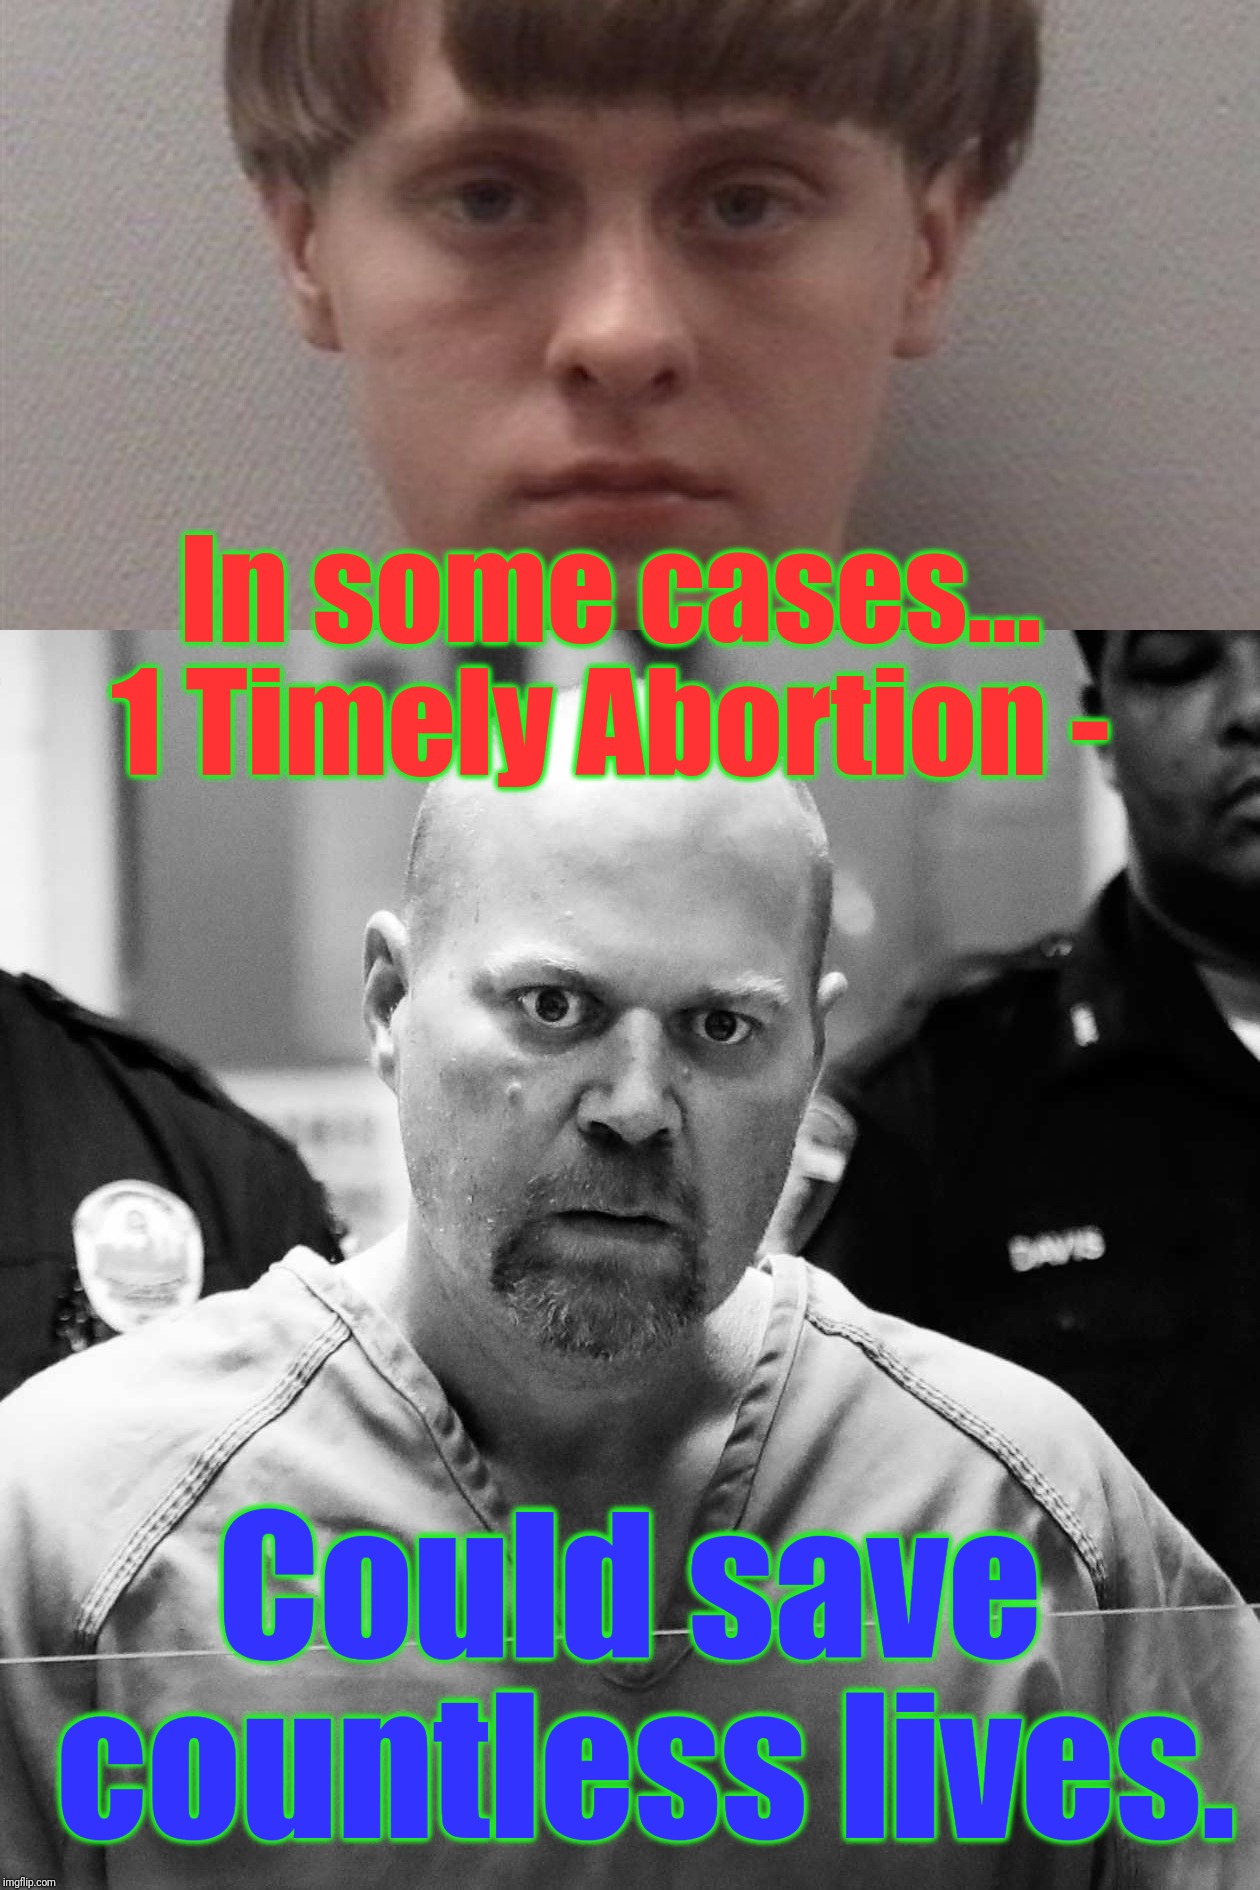 In some cases... 1 Timely Abortion - Could save countless lives. | made w/ Imgflip meme maker